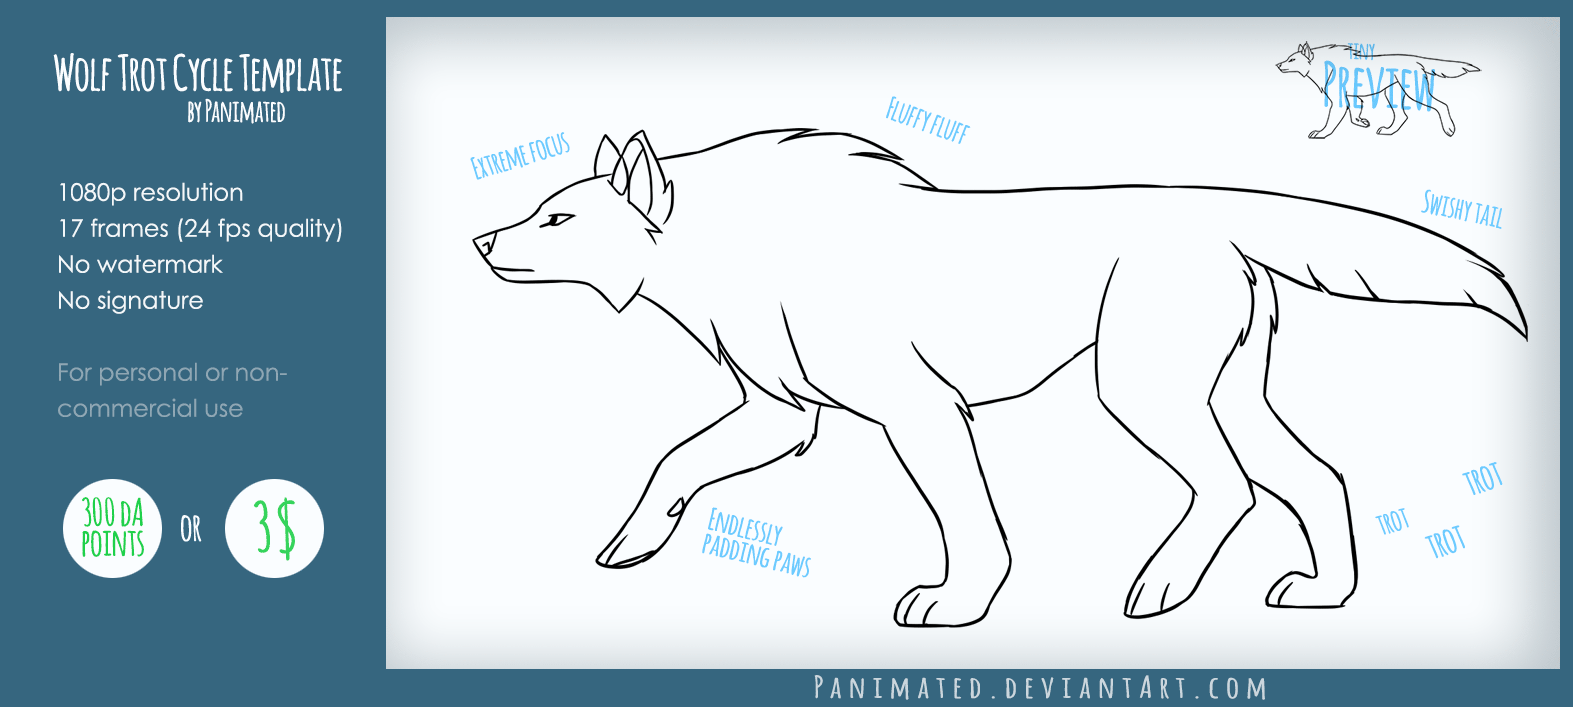 Wolf Trot Cycle Animated Template by Panimated